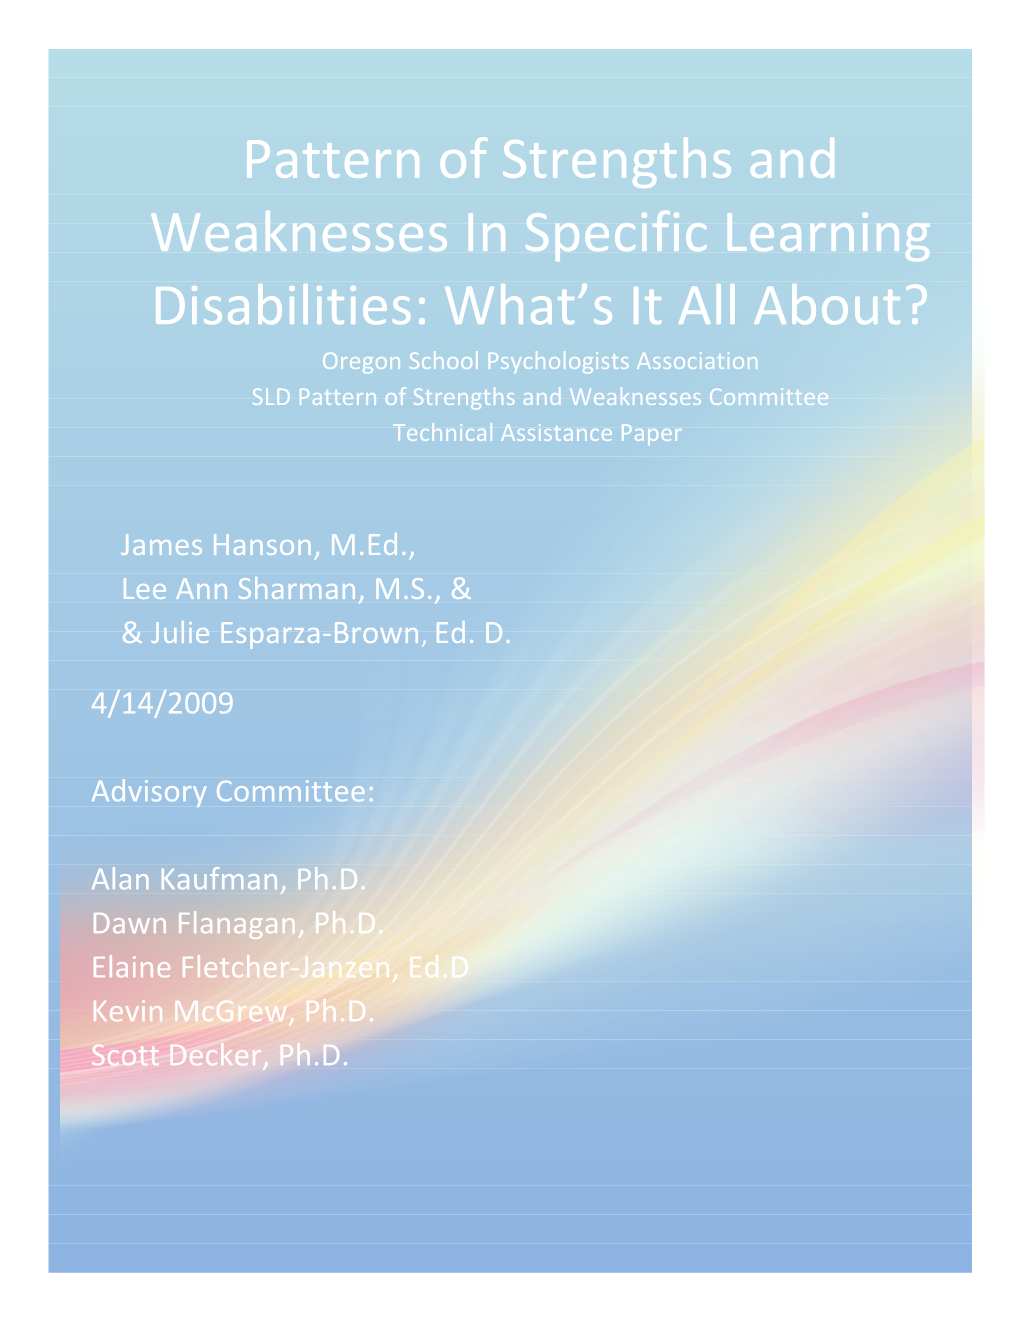 Pattern Of Strengths And Weaknesses In Specific Learning Disabilities: What’S It All About? Draft 11/8/2008 James Hanson, M.Ed., Lee Ann Sharman, M.S., & Julie Esparza-Brown, Ed. D.